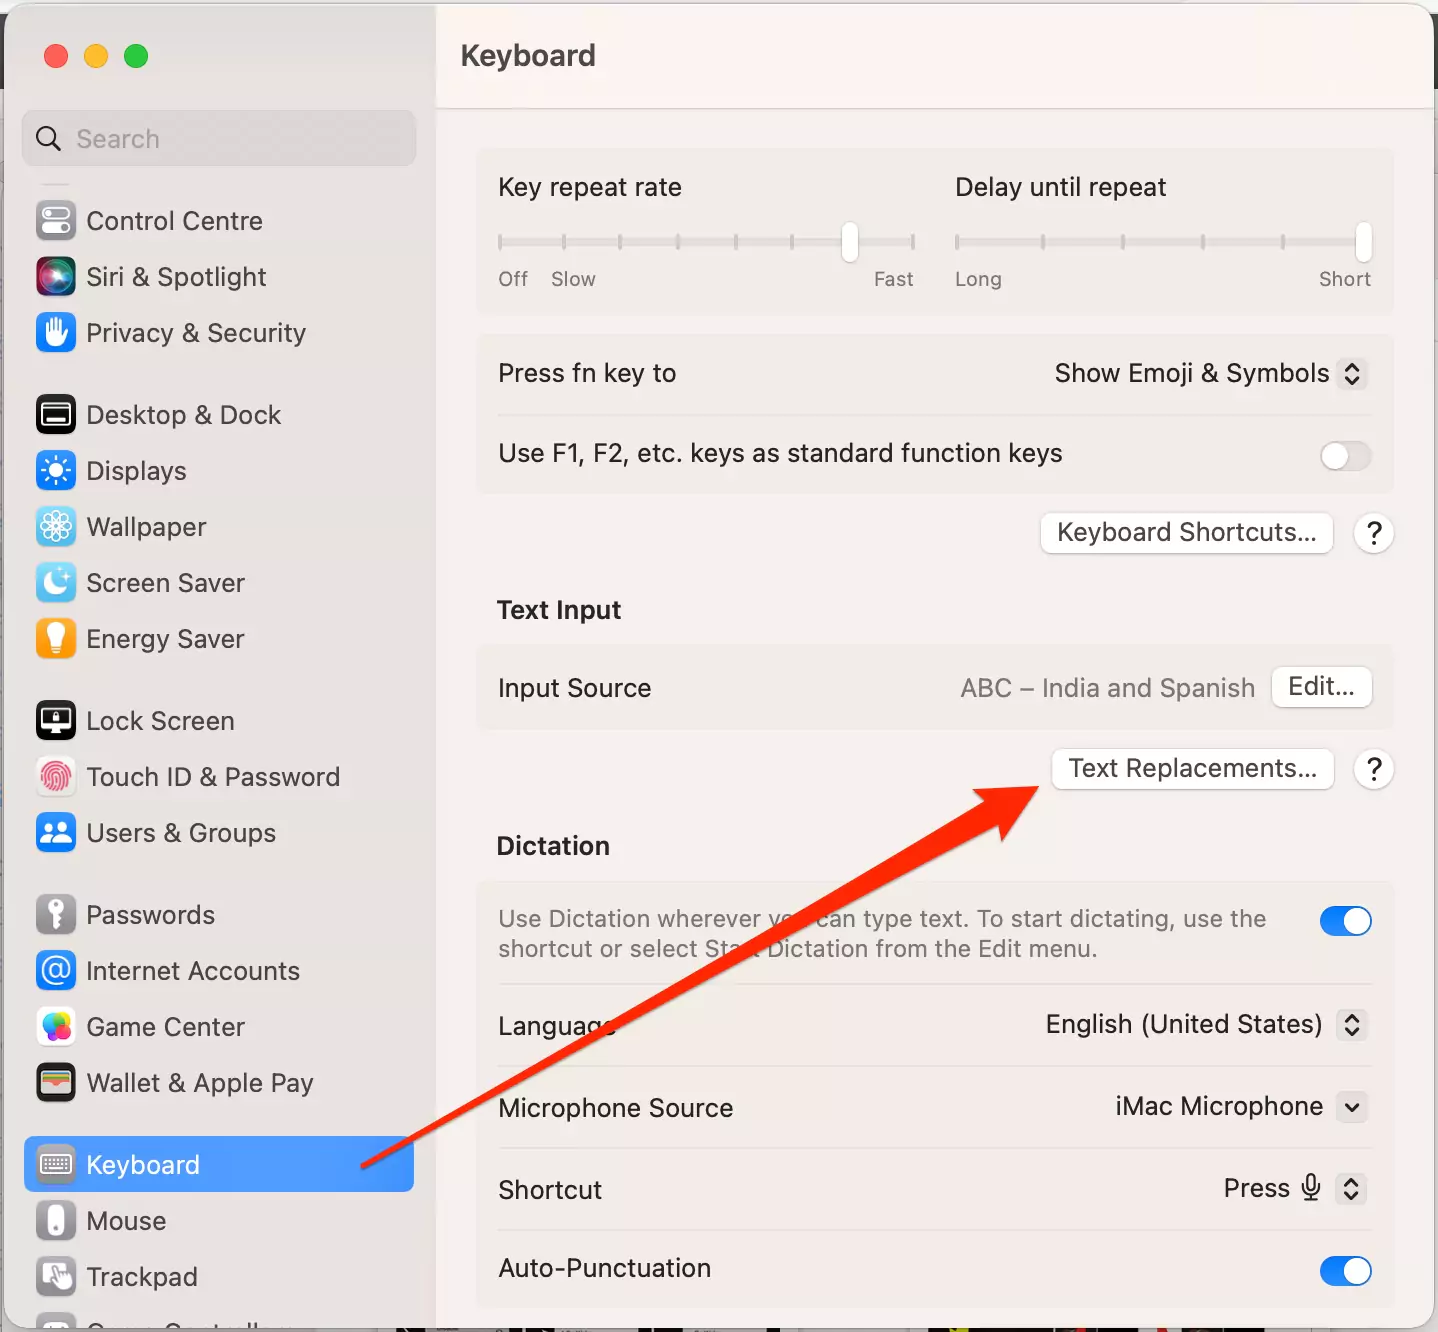 text-replacements-option-on-mac-in-macos-ventura